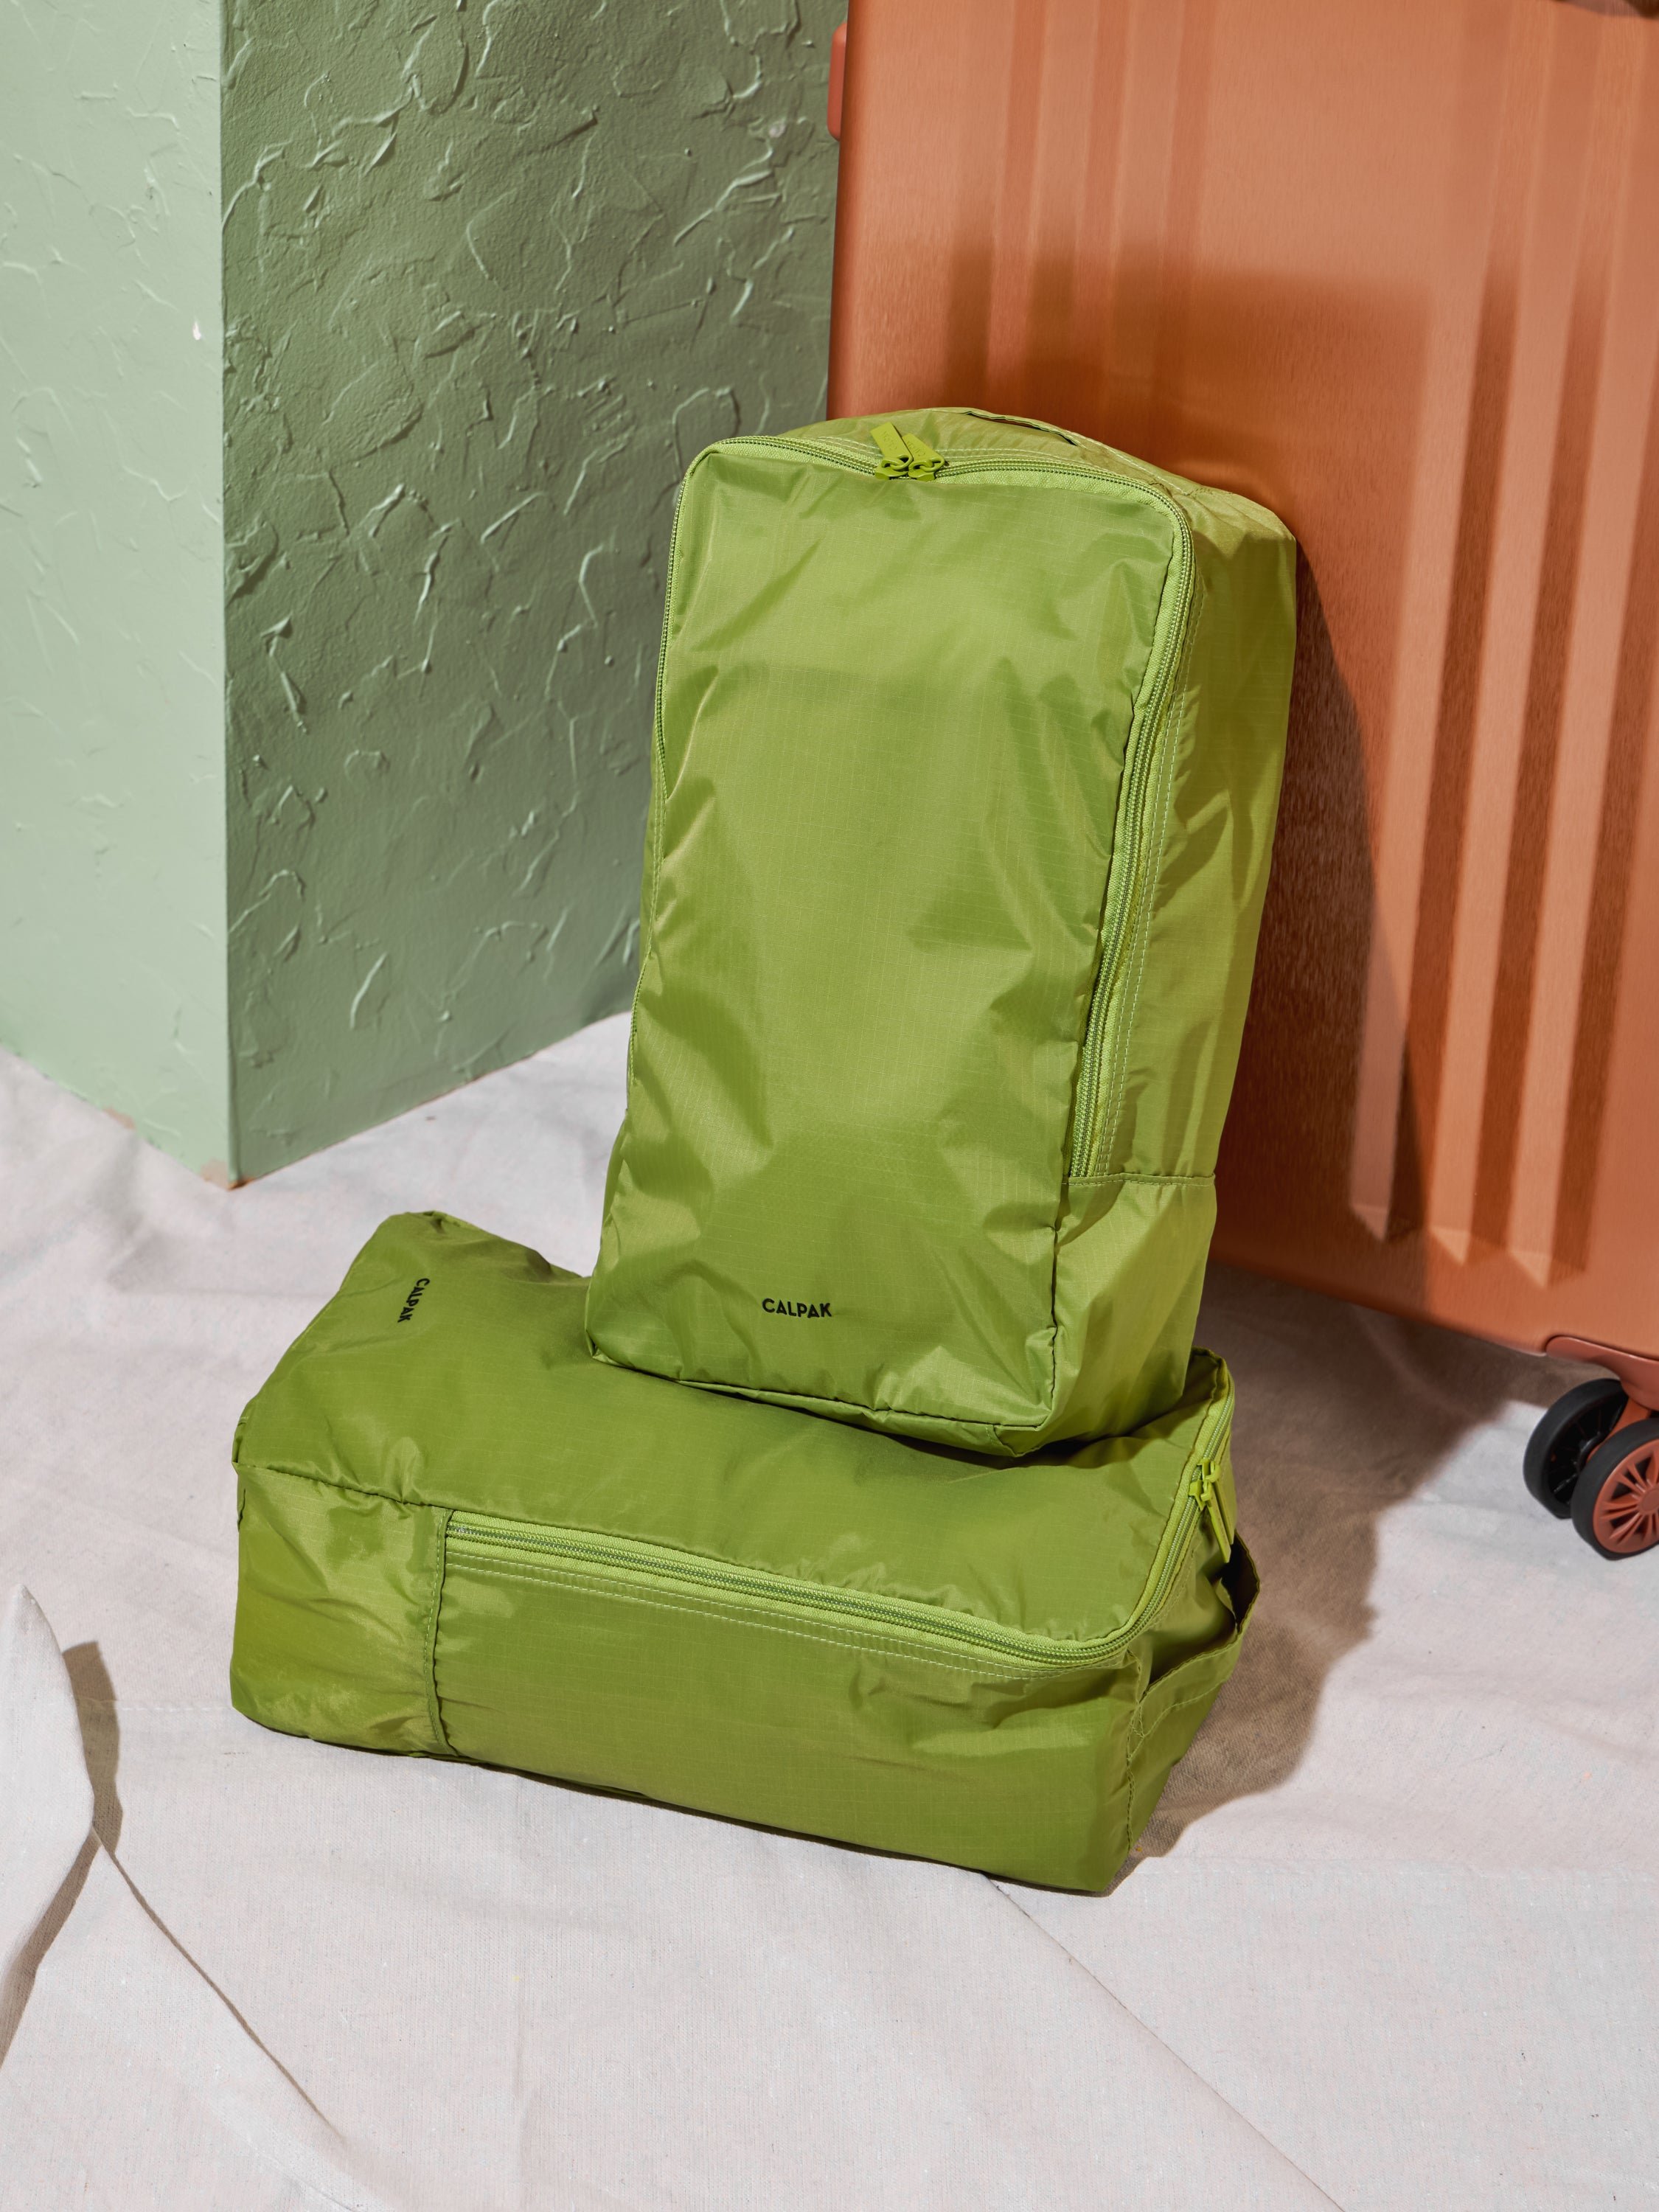 CALPAK Compakt Shoe Bag in green palm stacked on one another and leaning against CALPAK Ambeur Carry-On Luggage in copper